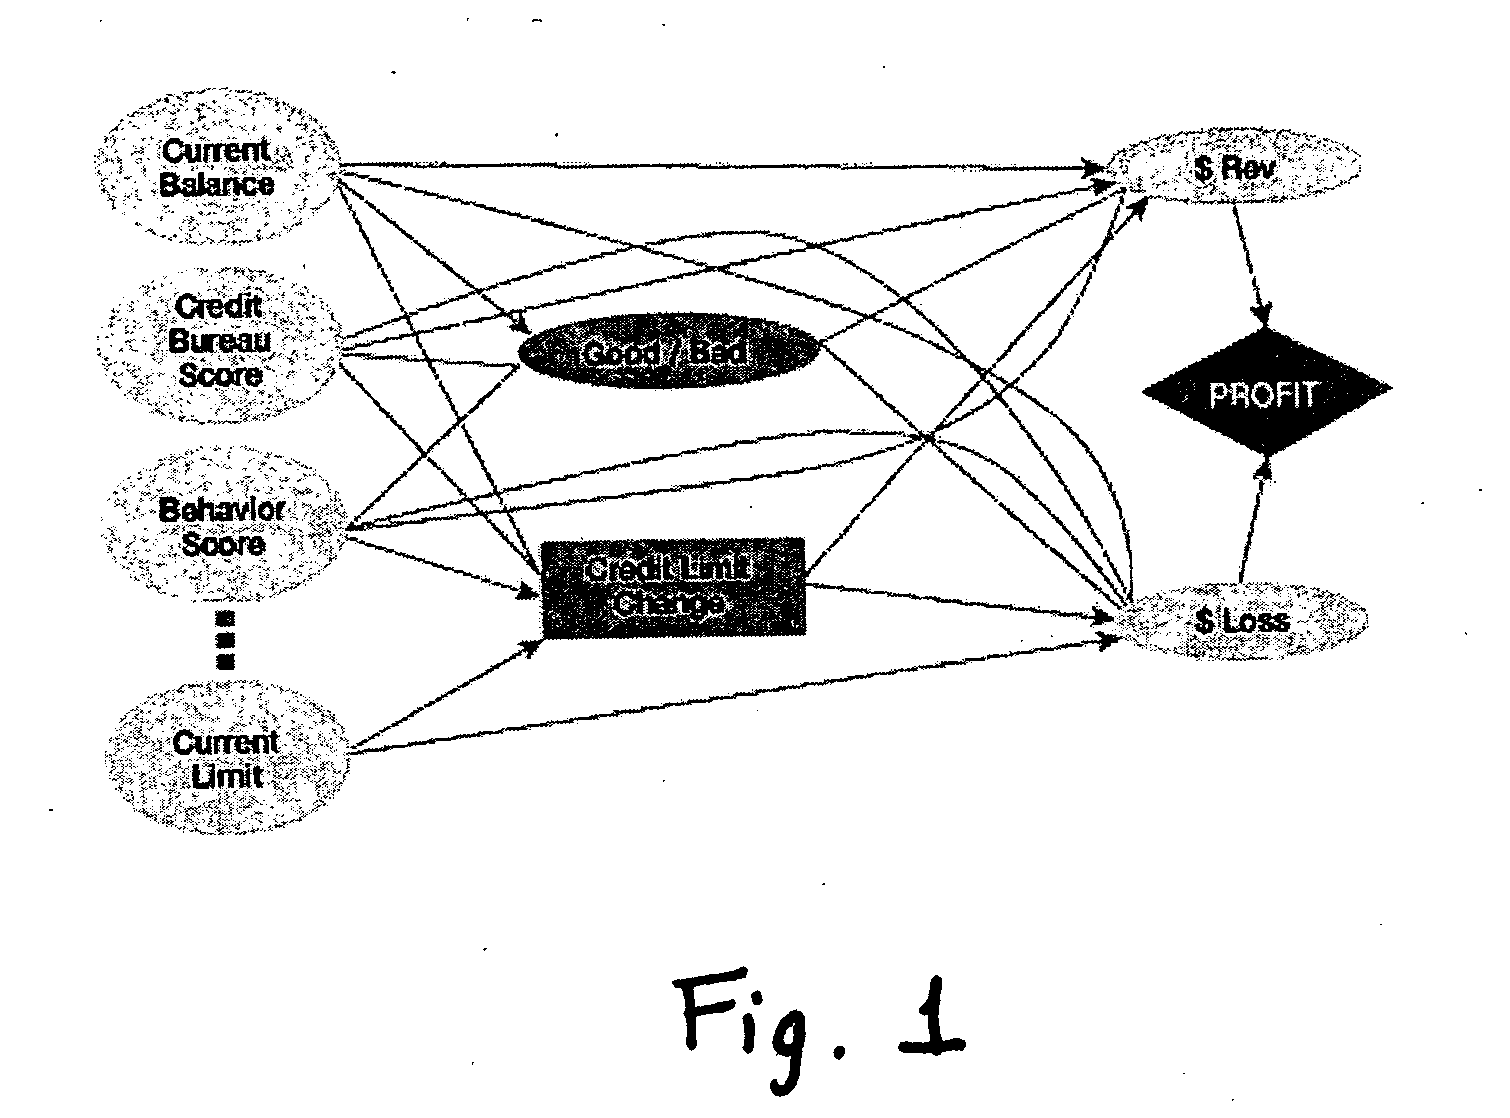 Method and apparatus for creating and evaluating strategies